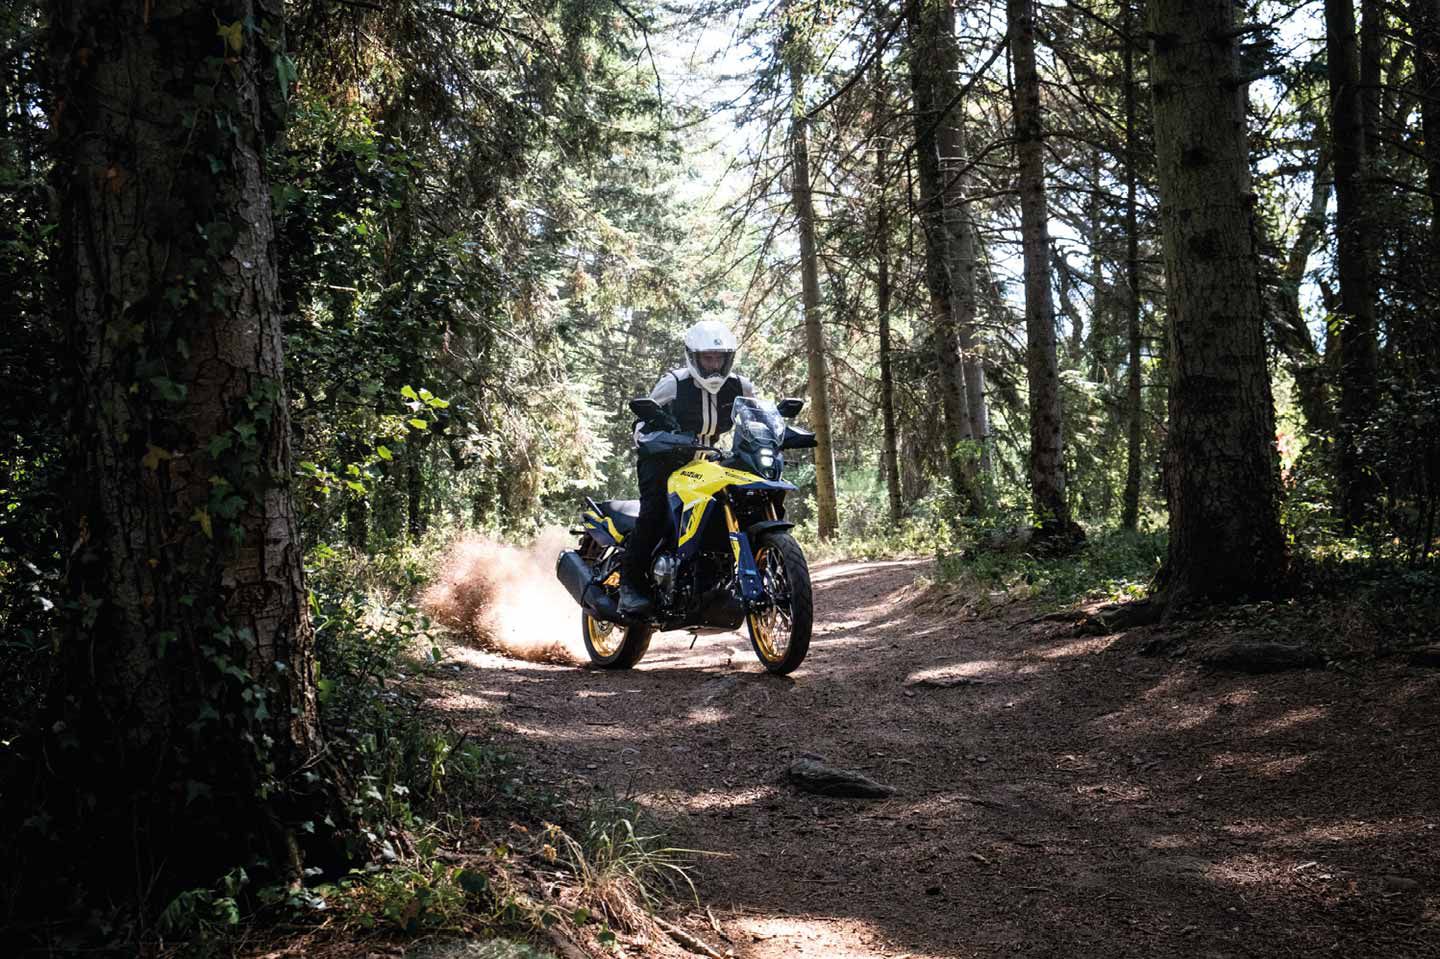 Suzuki refers to the V-Strom 800DE as “the most dirt- and travel-worthy V-Strom ever.”